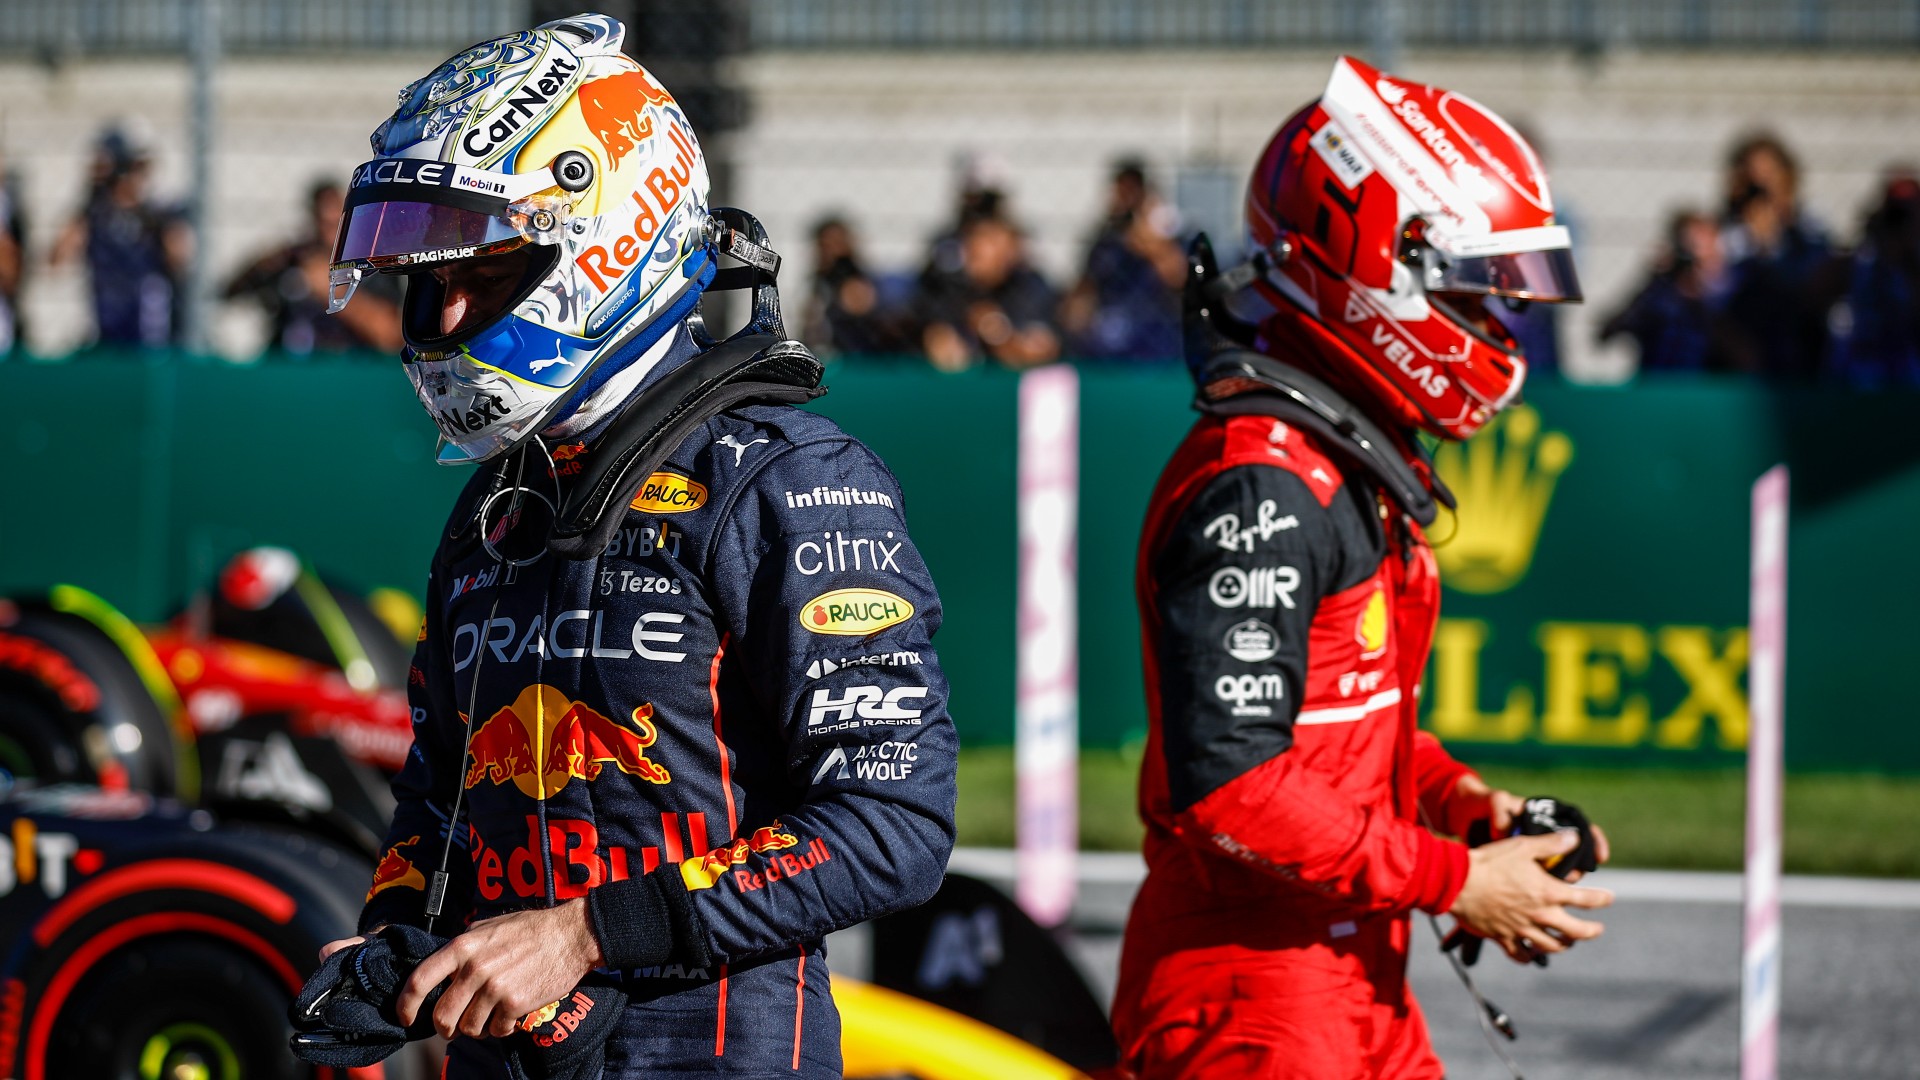 Several drivers, including Verstappen, Leclerc received grid penalties